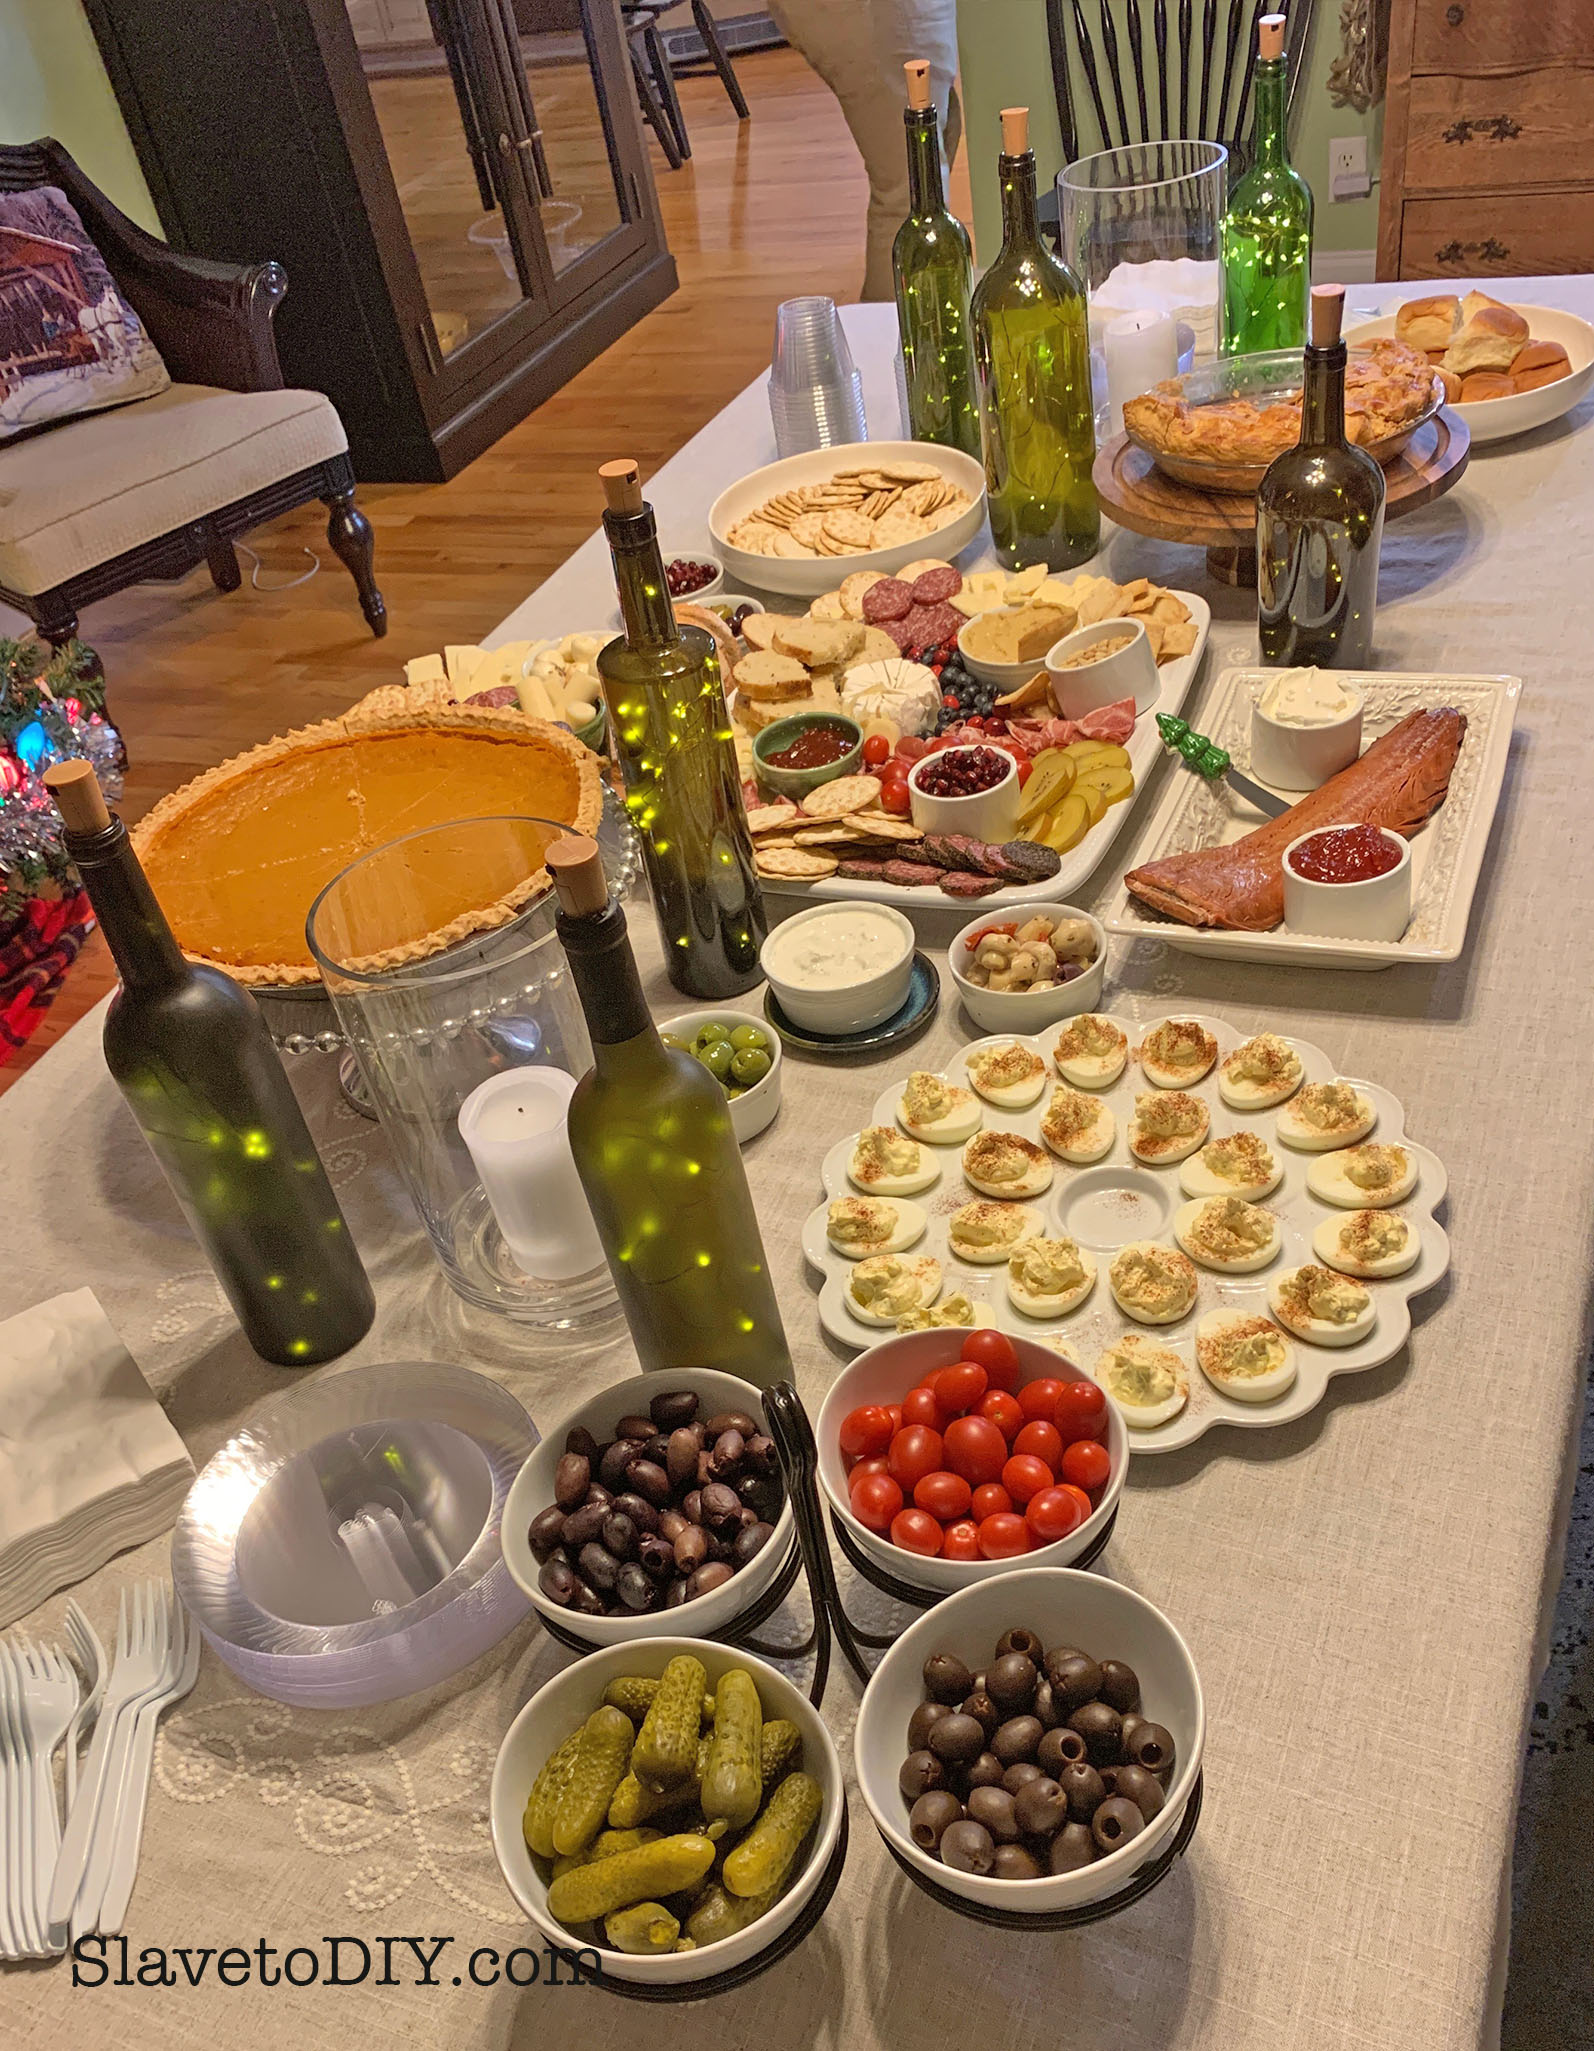 Charcuterie Boards: Easy Appetizers For Holiday Entertaining To Wow Your Guests